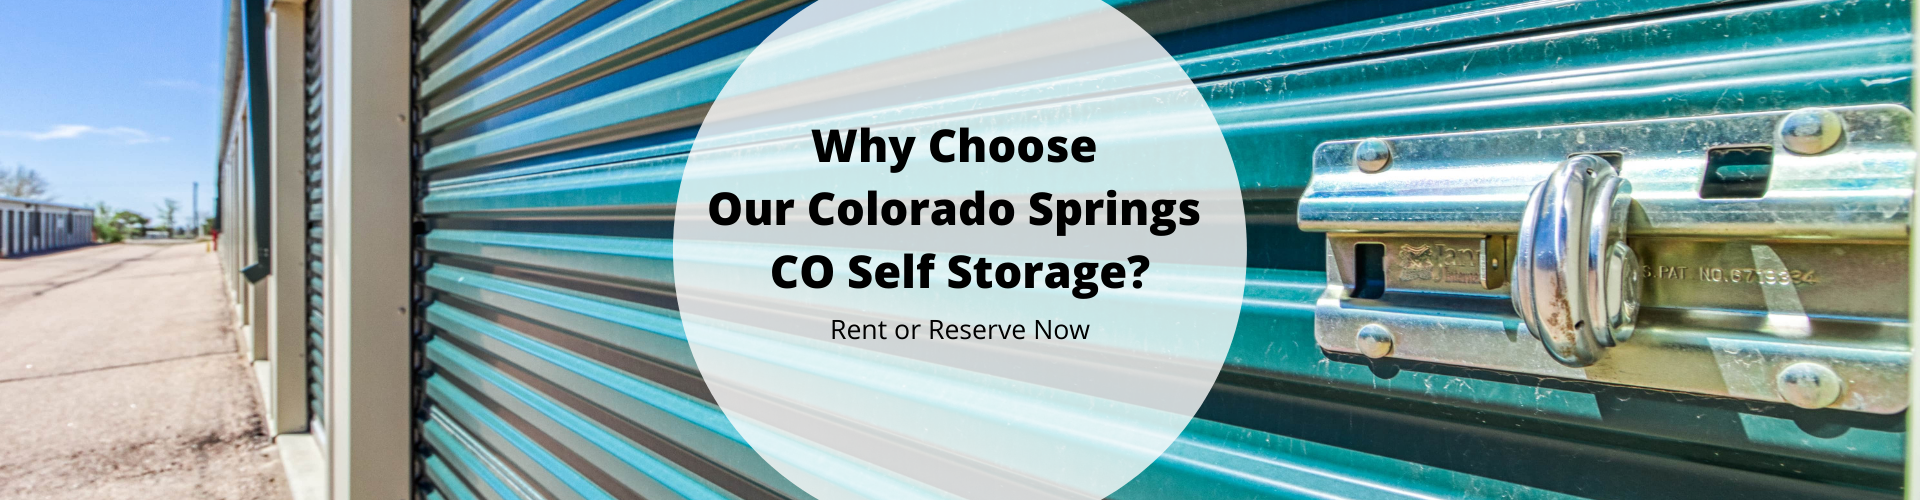 Why Choose Our Colorado Springs CO Self Storage?